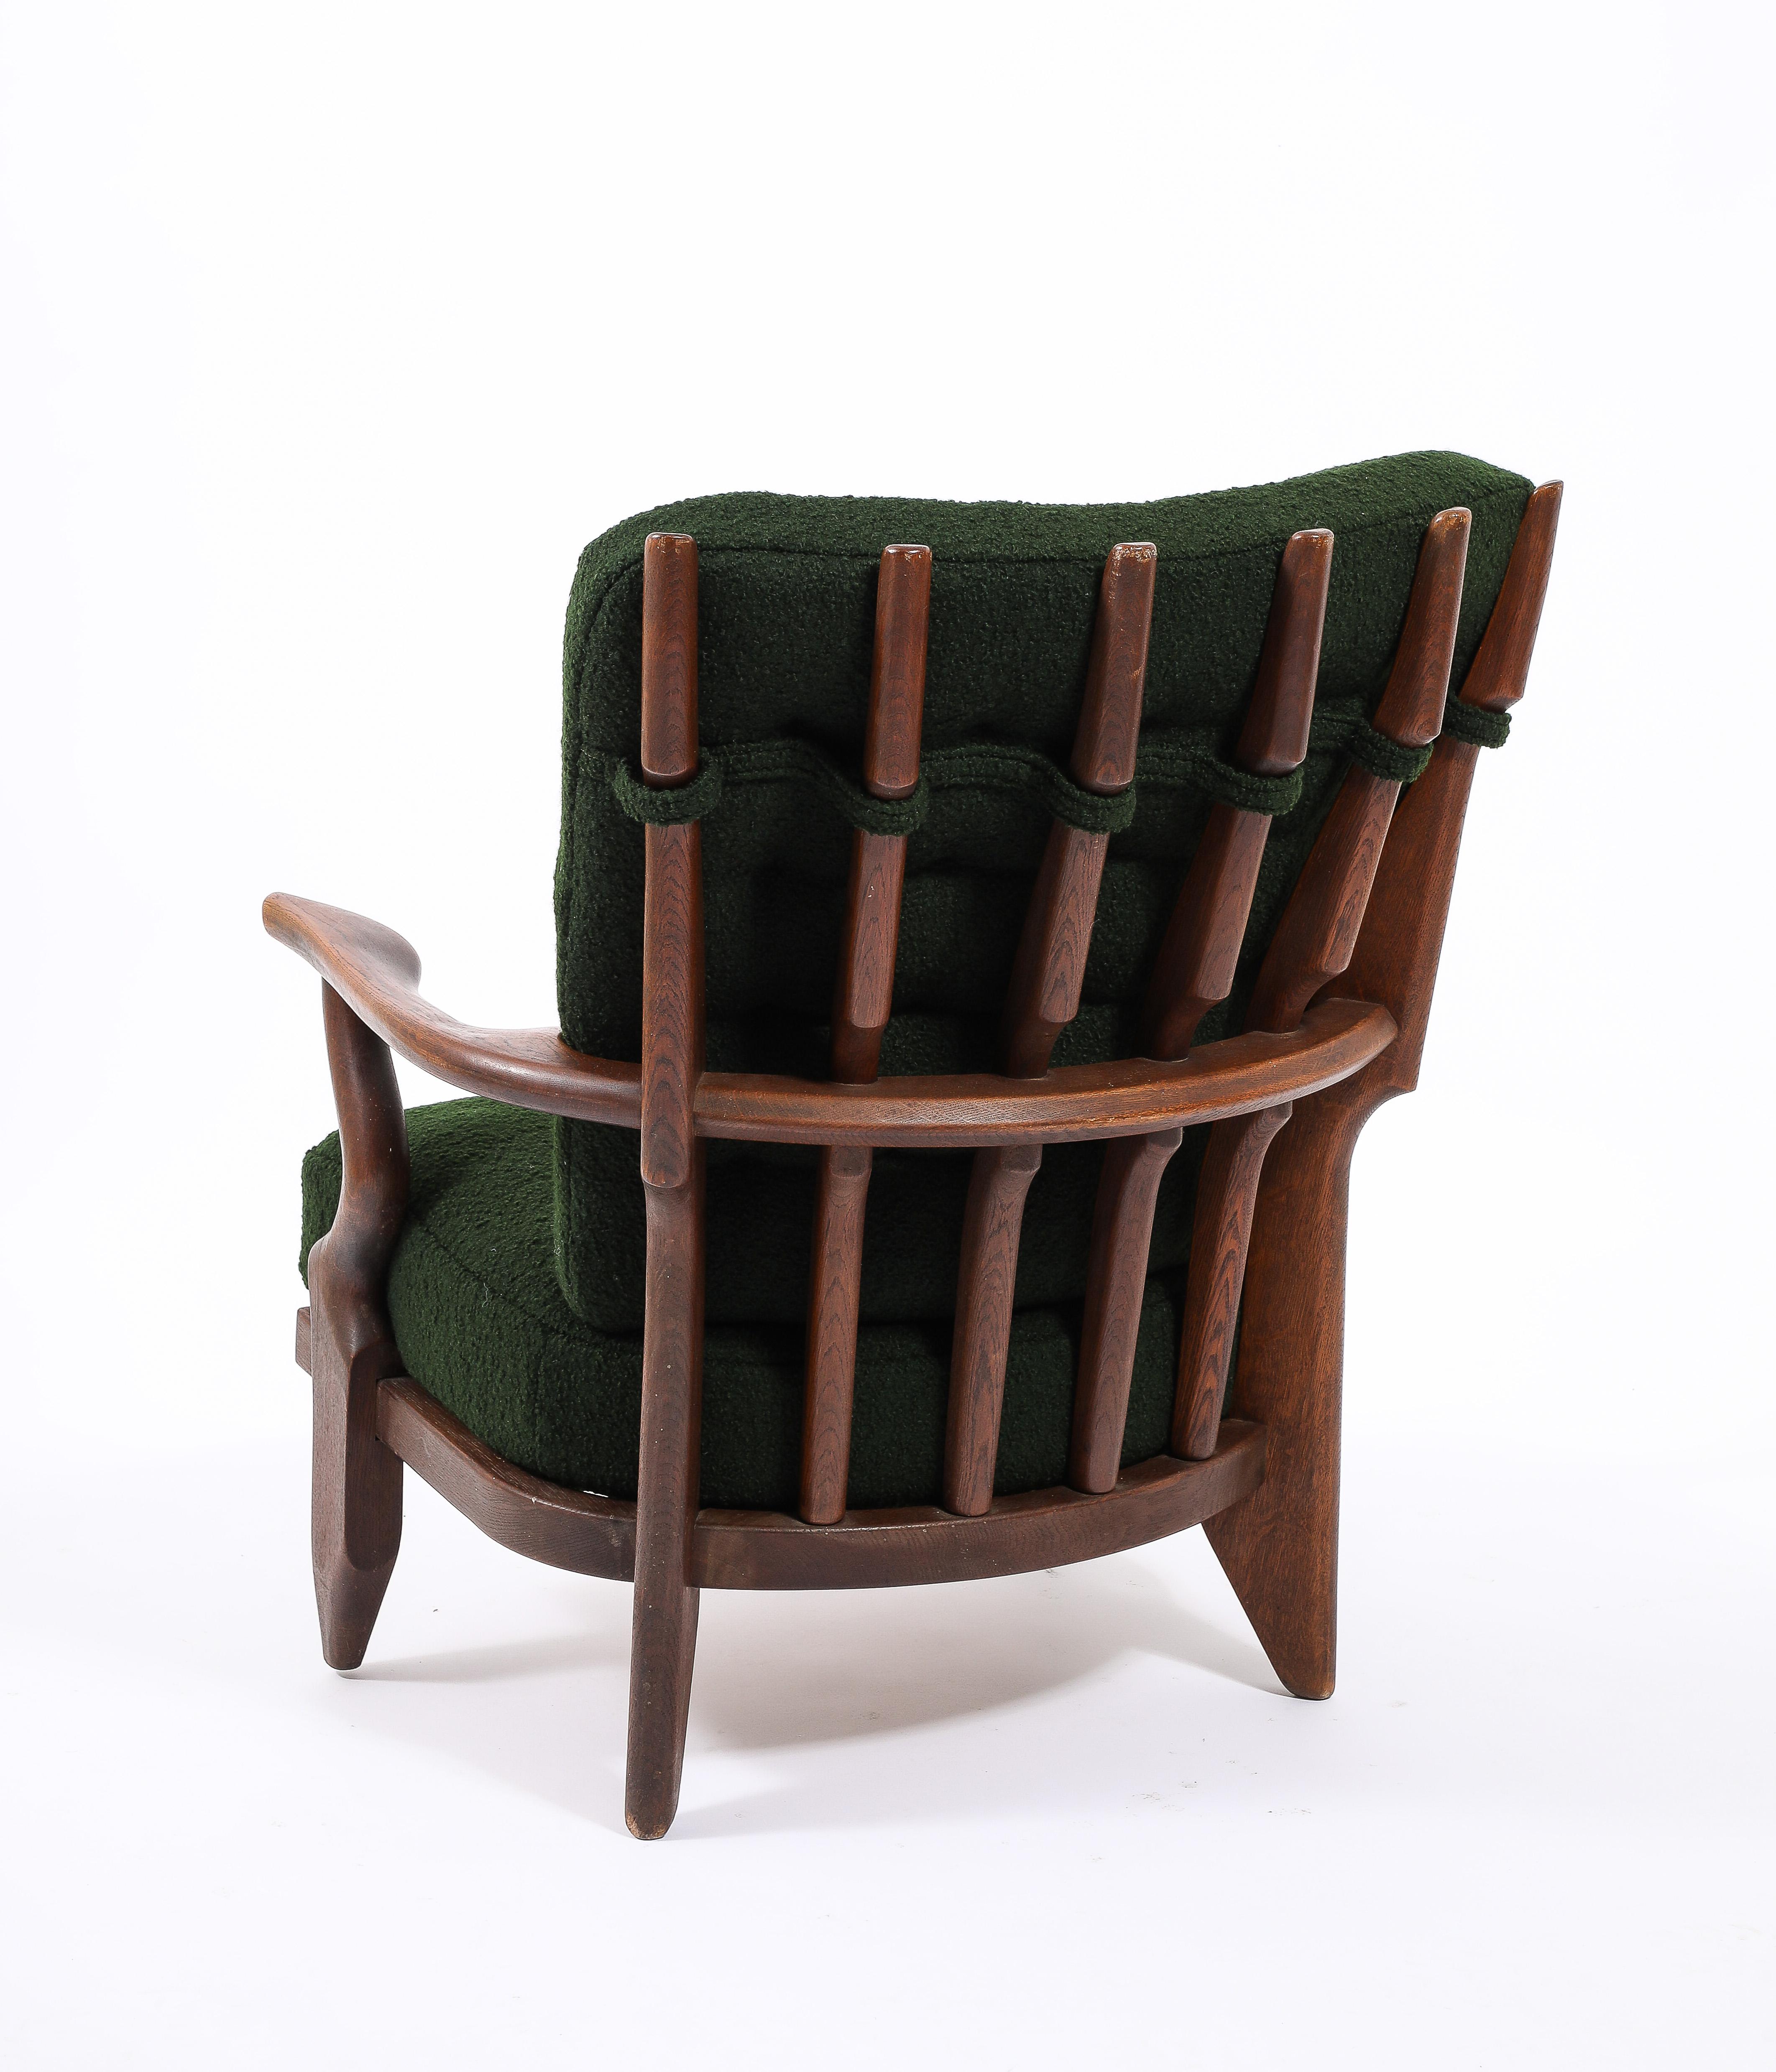 20th Century Guillerme & Chambron Petit Repos Armchair in Green Bouclé, France 1950's For Sale